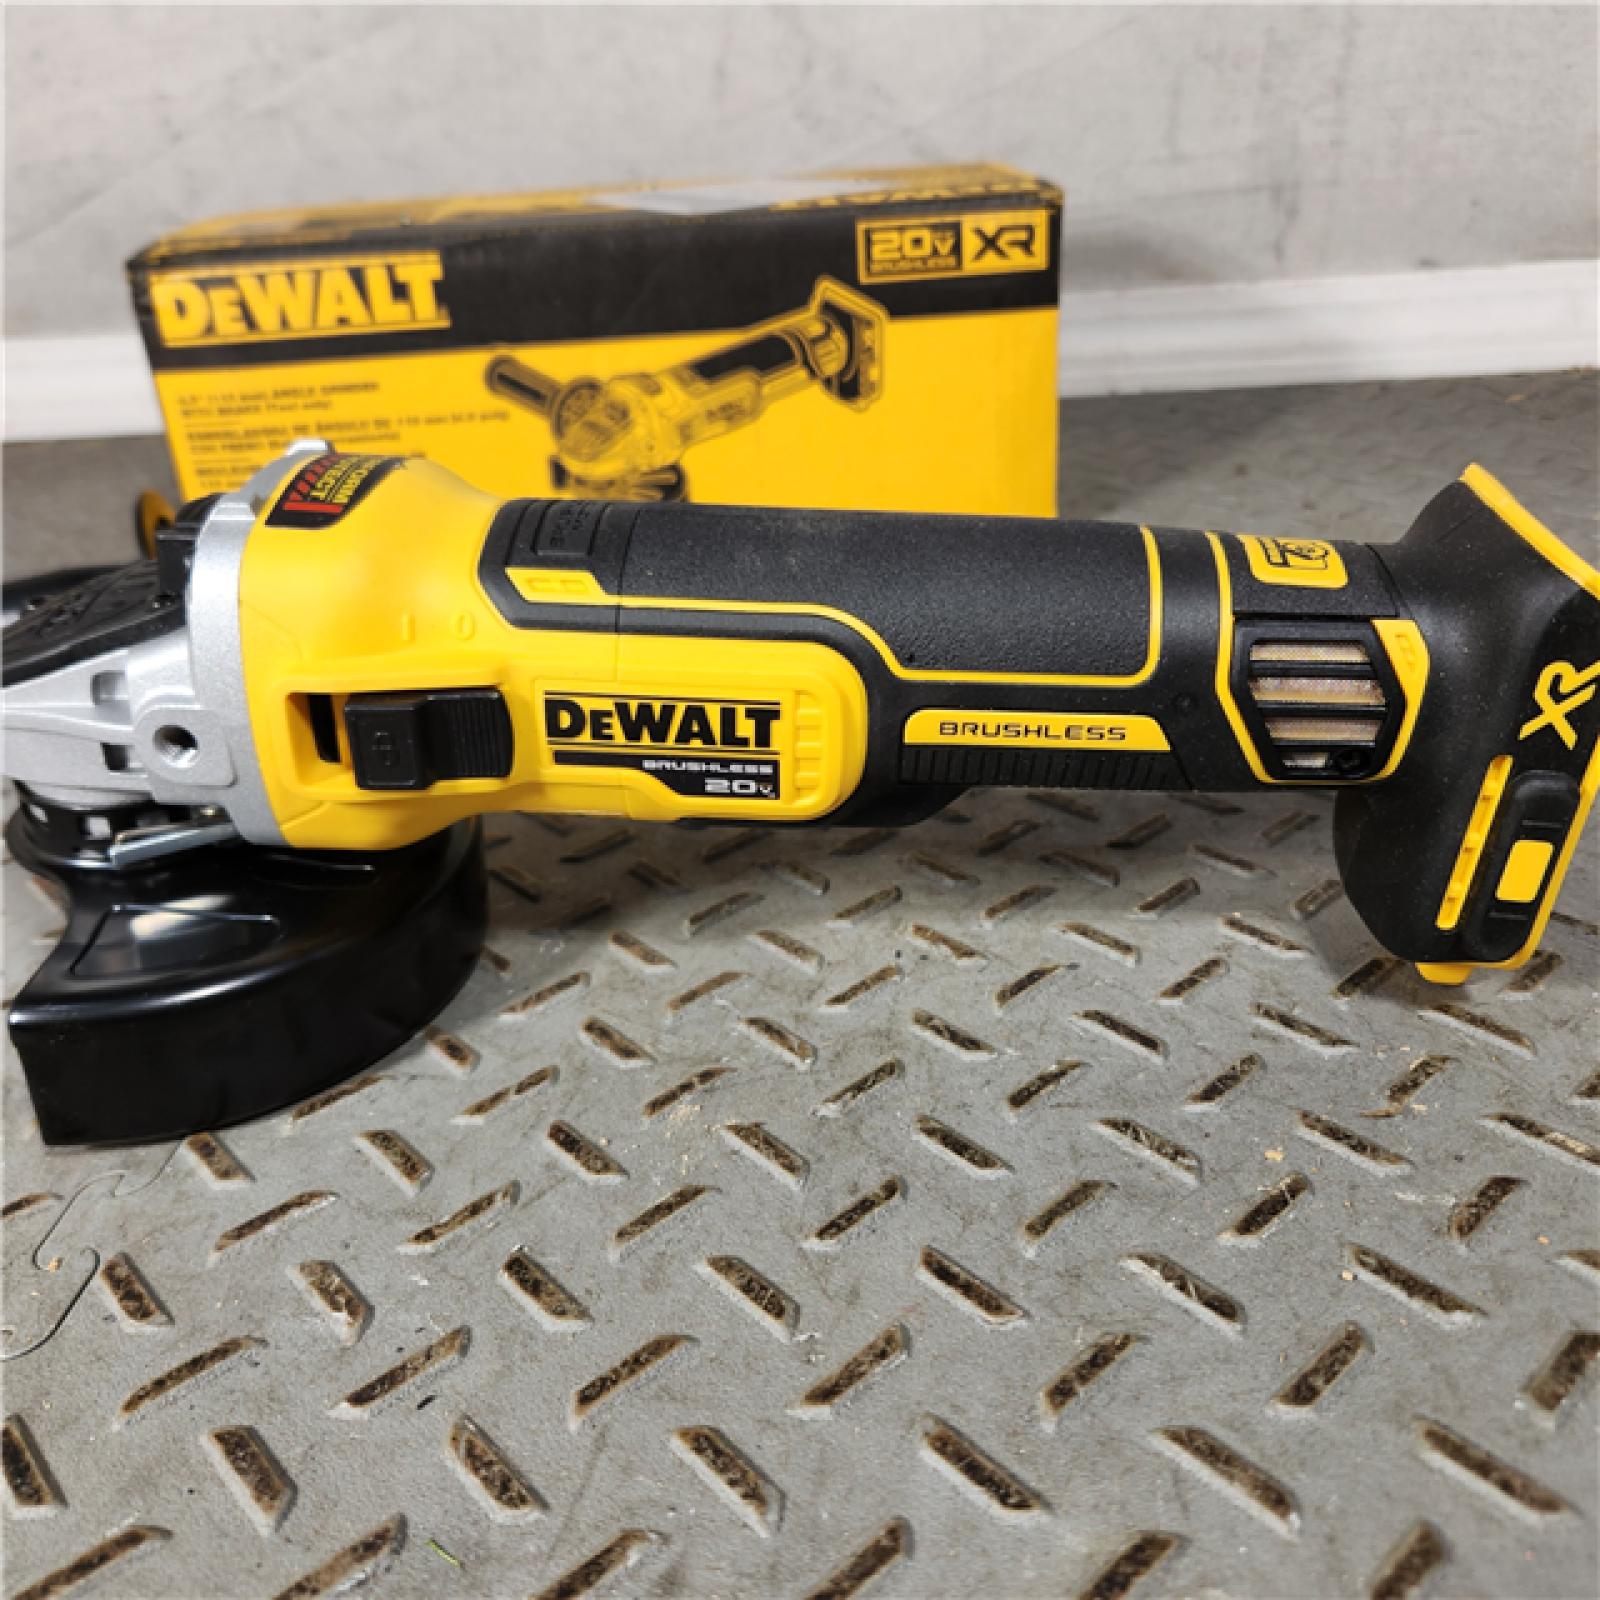 Houston Location - AS-IS DeWalt DCG405B 20V Max XR 4.5-Inch Slide Switch Small Angle Grinder (Tool Only) - Appears IN GOOD Condition